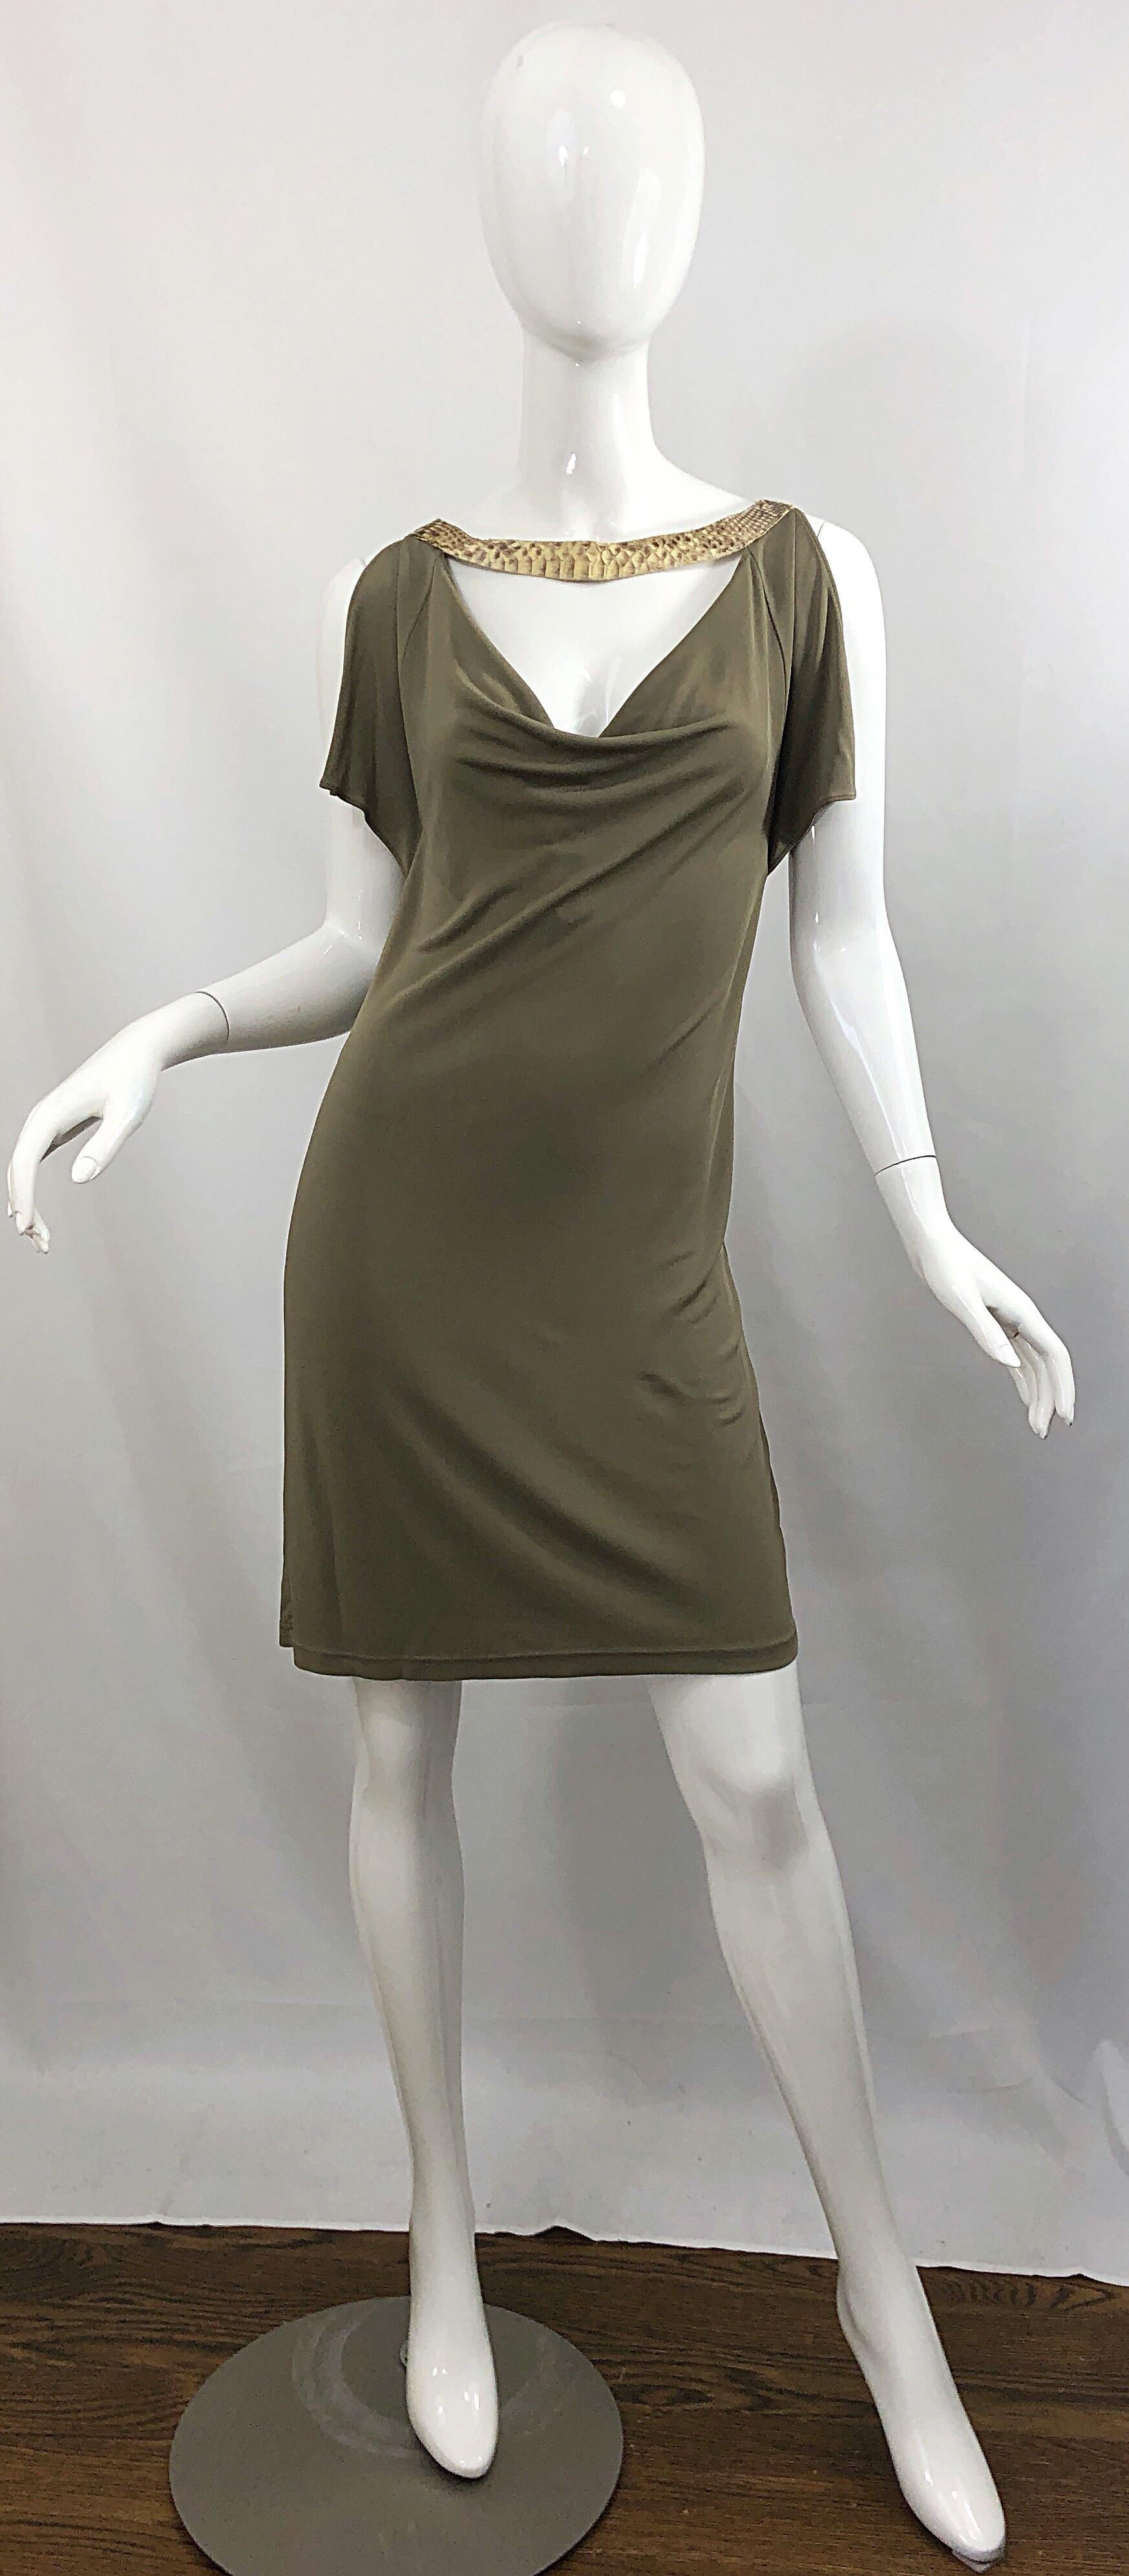 Chic 2000s MICHAEL KORS COLLECTION tamper rayon jersey and python snake skin cold shoulder runway dress! Features the perfect neutral dark taupe color that looks great on any skin tone. Natural brown and ivory python snake skin along the 
cut-out